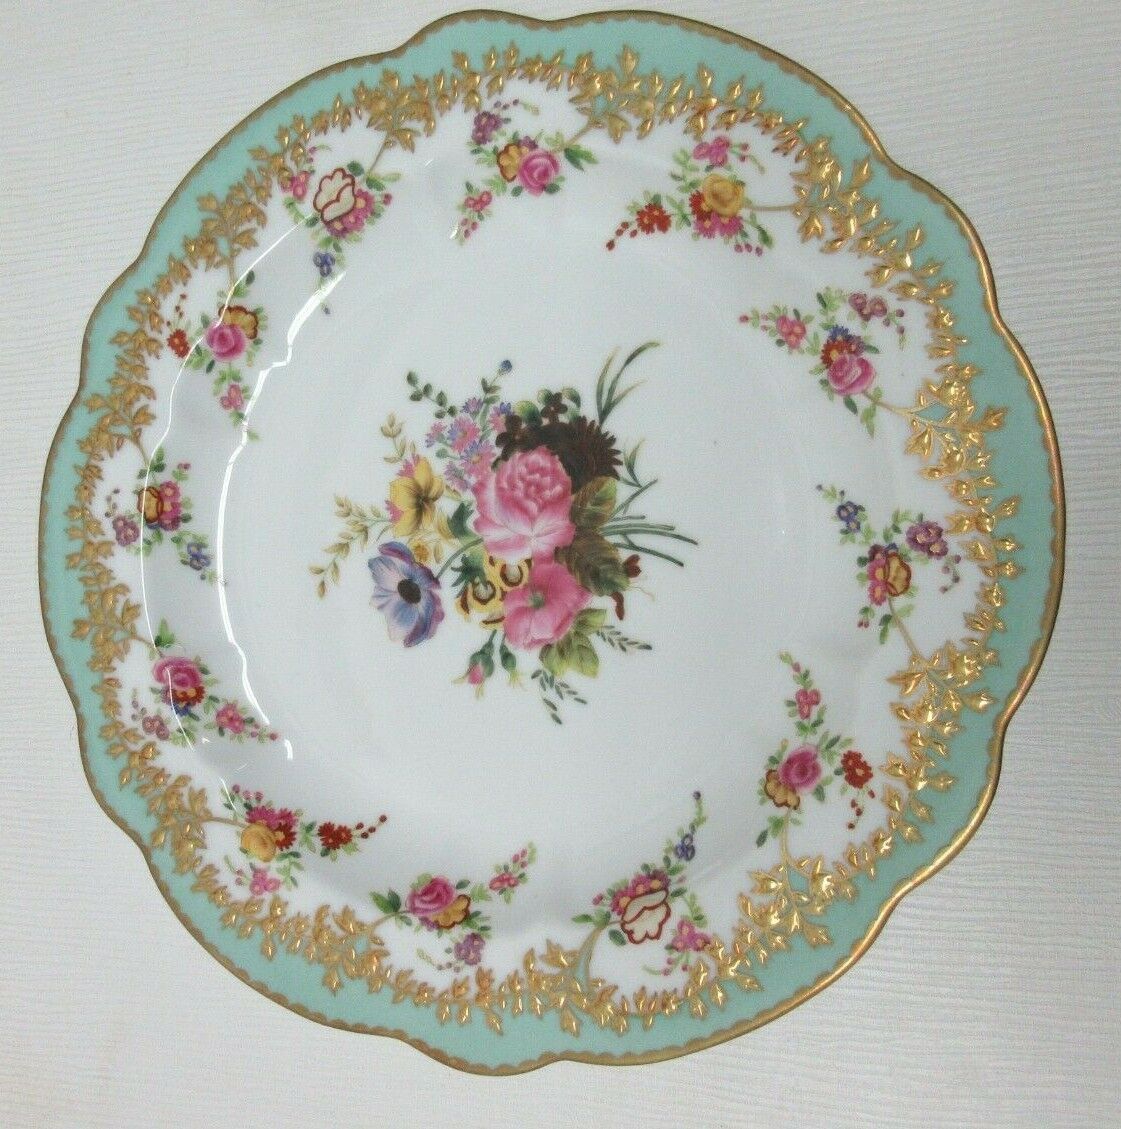 Chelsea House Decorative Floral Design Birds Bouquet Plate Asian Inspired